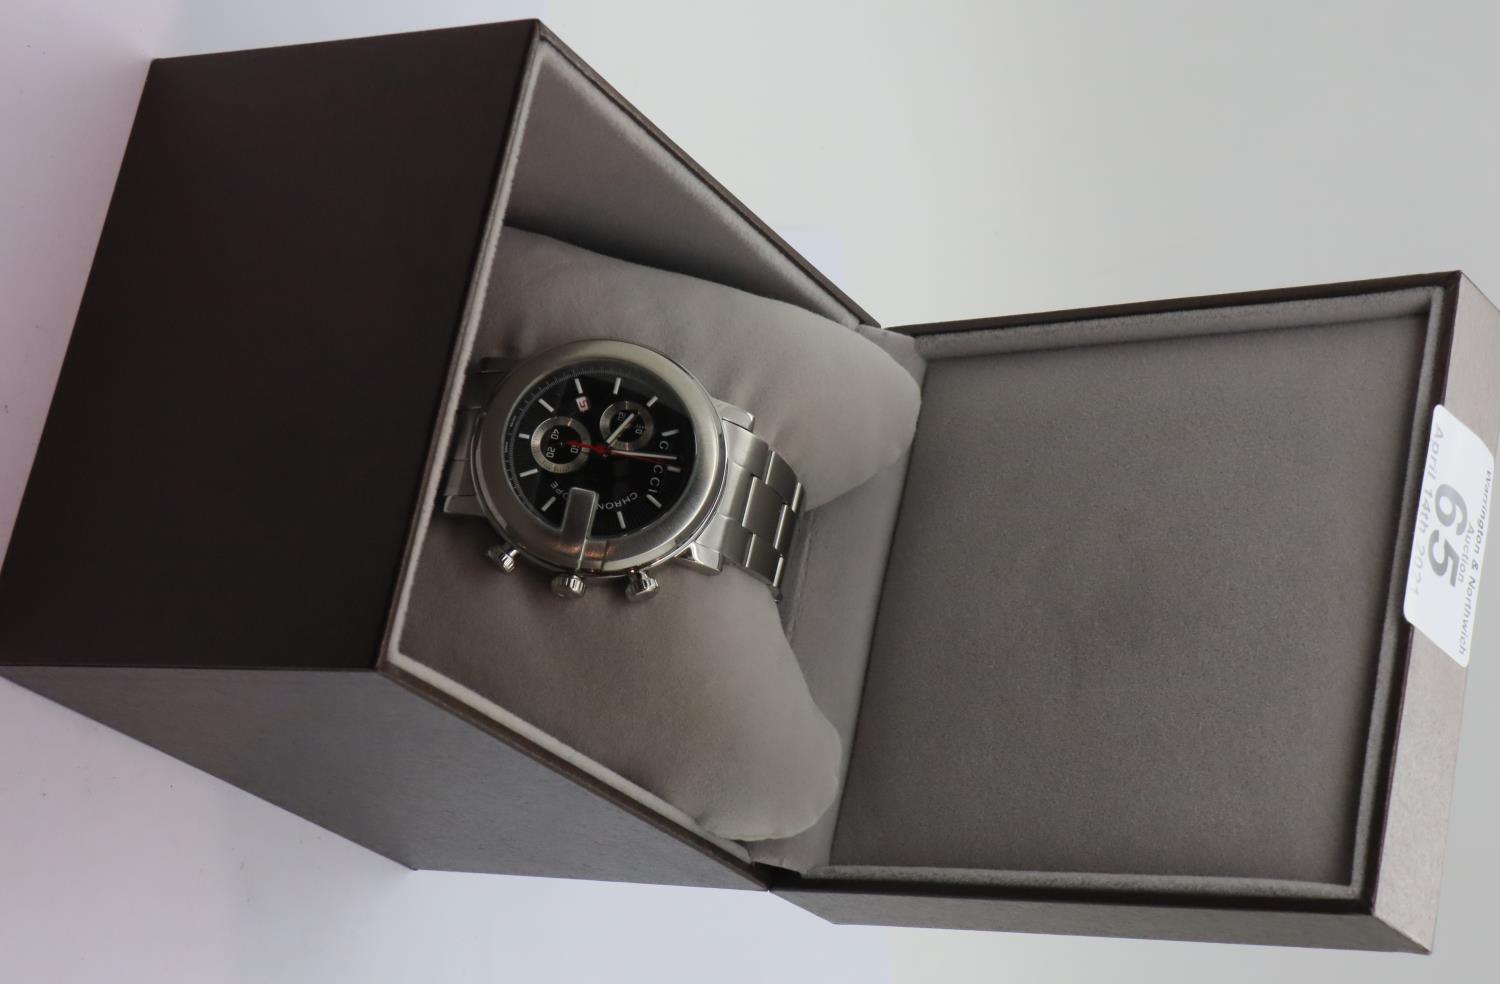 Gents Gucci chronograph wristwatch, having a black dial, stainless steel body and bracelet in - Image 2 of 5